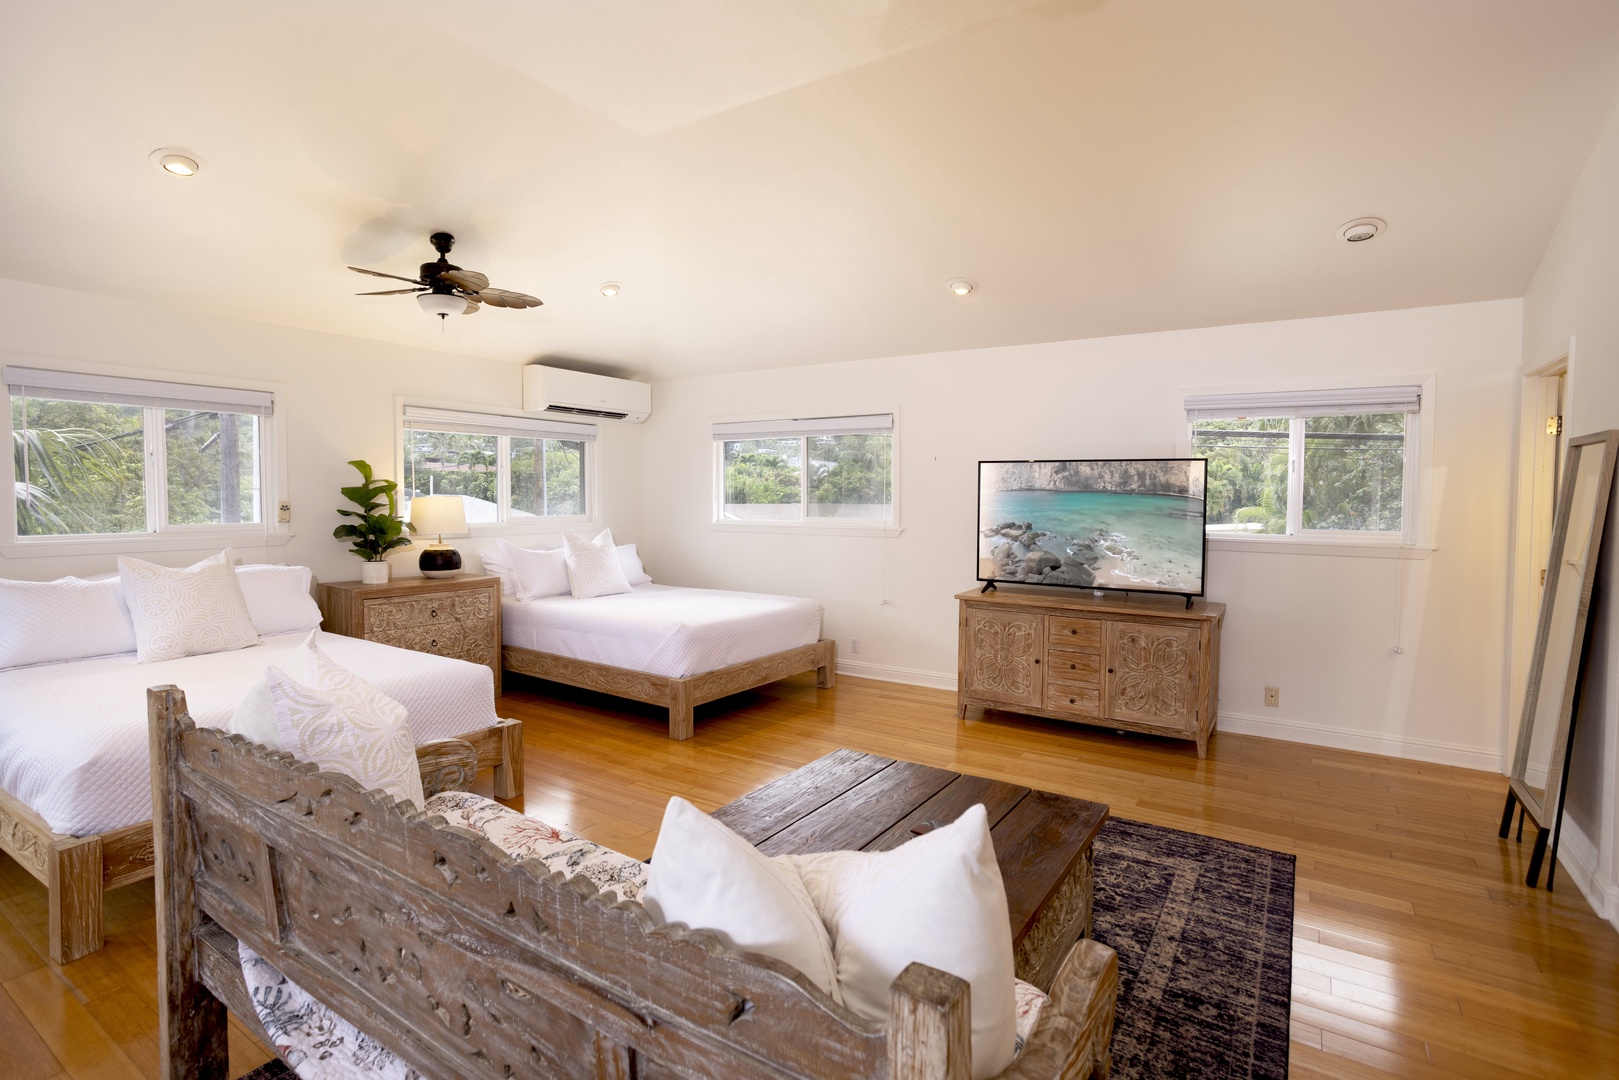 Kailua Vacation Rentals, Mokulua Seaside - Guest bedroom with two queen beds, TV and a mini lounge area, a perfect room for small family members